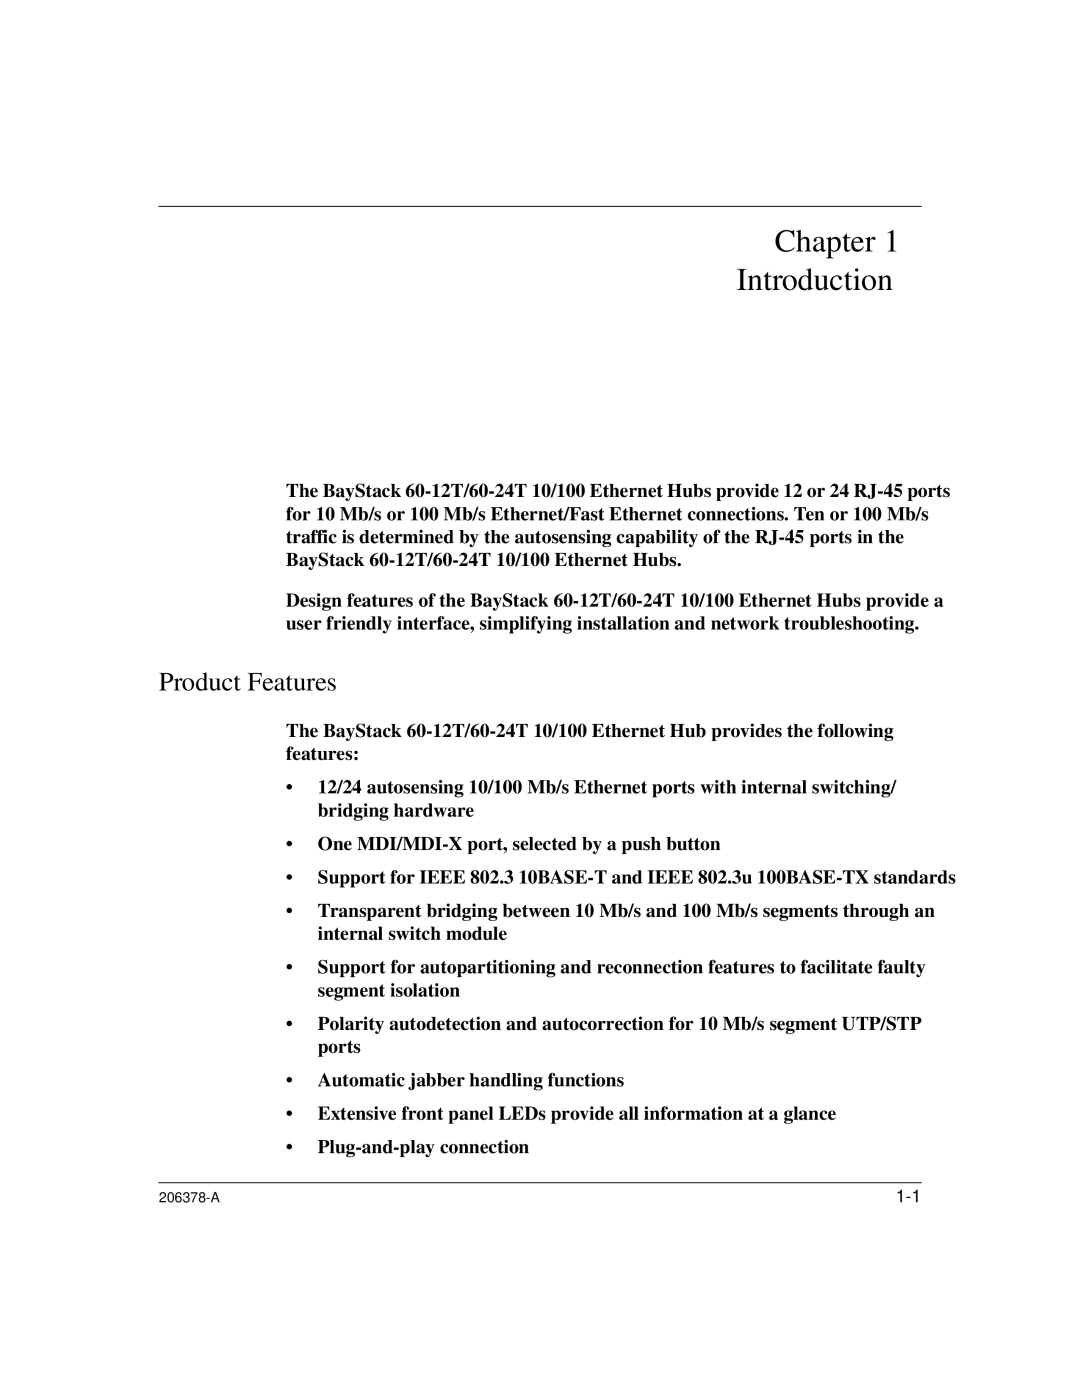 Nortel Networks 60-12T, 60-24T manual Chapter Introduction, Product Features 